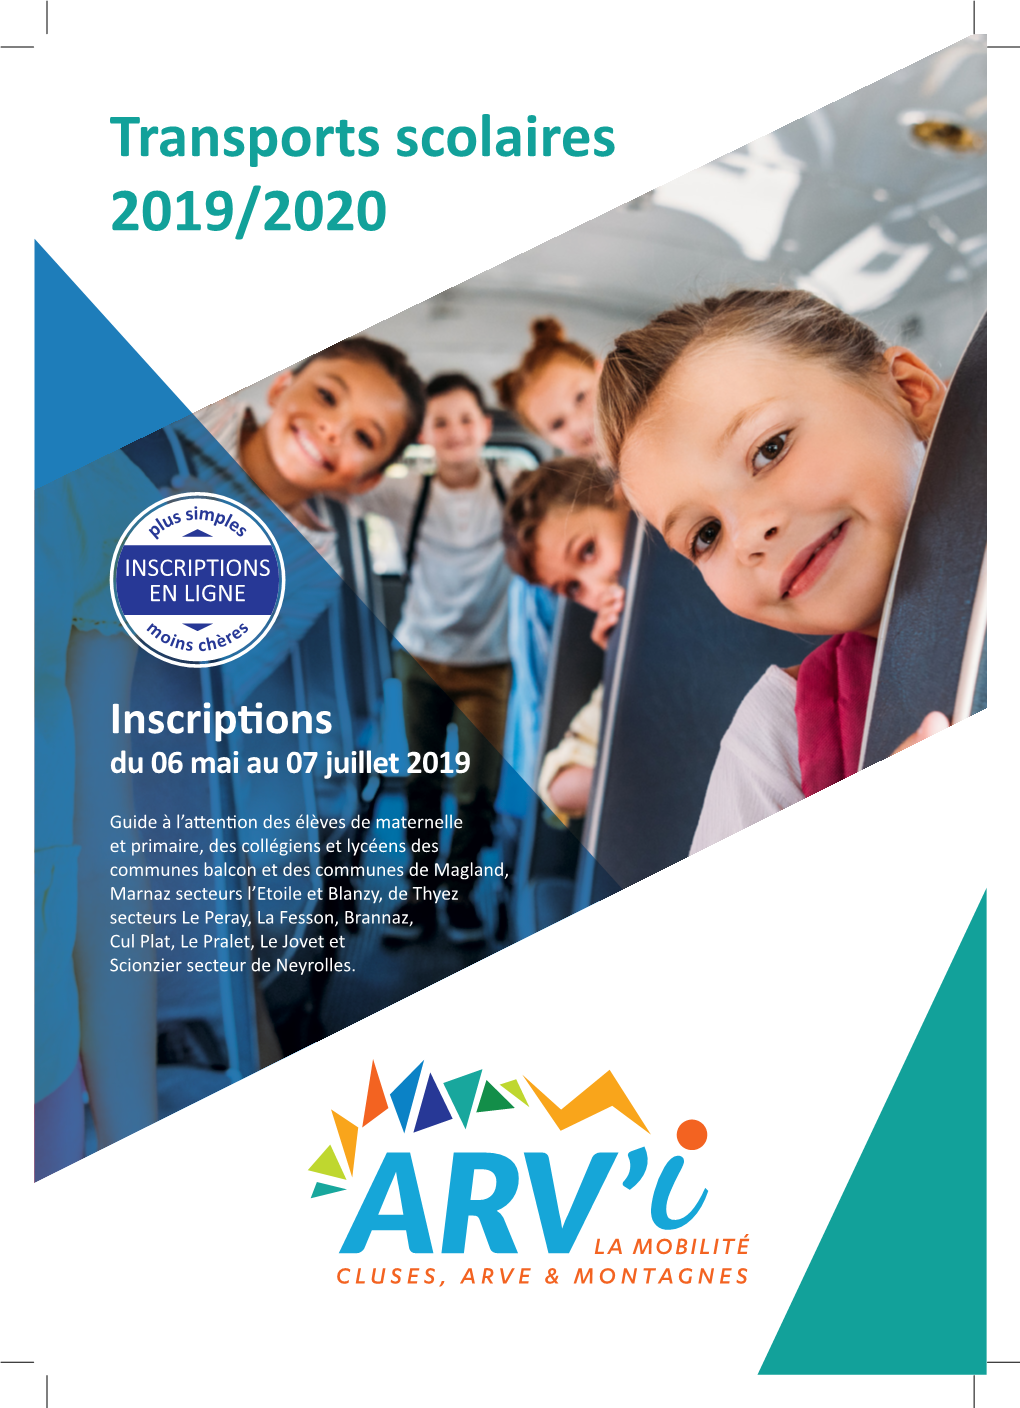 Transports Scolaires 2019/2020